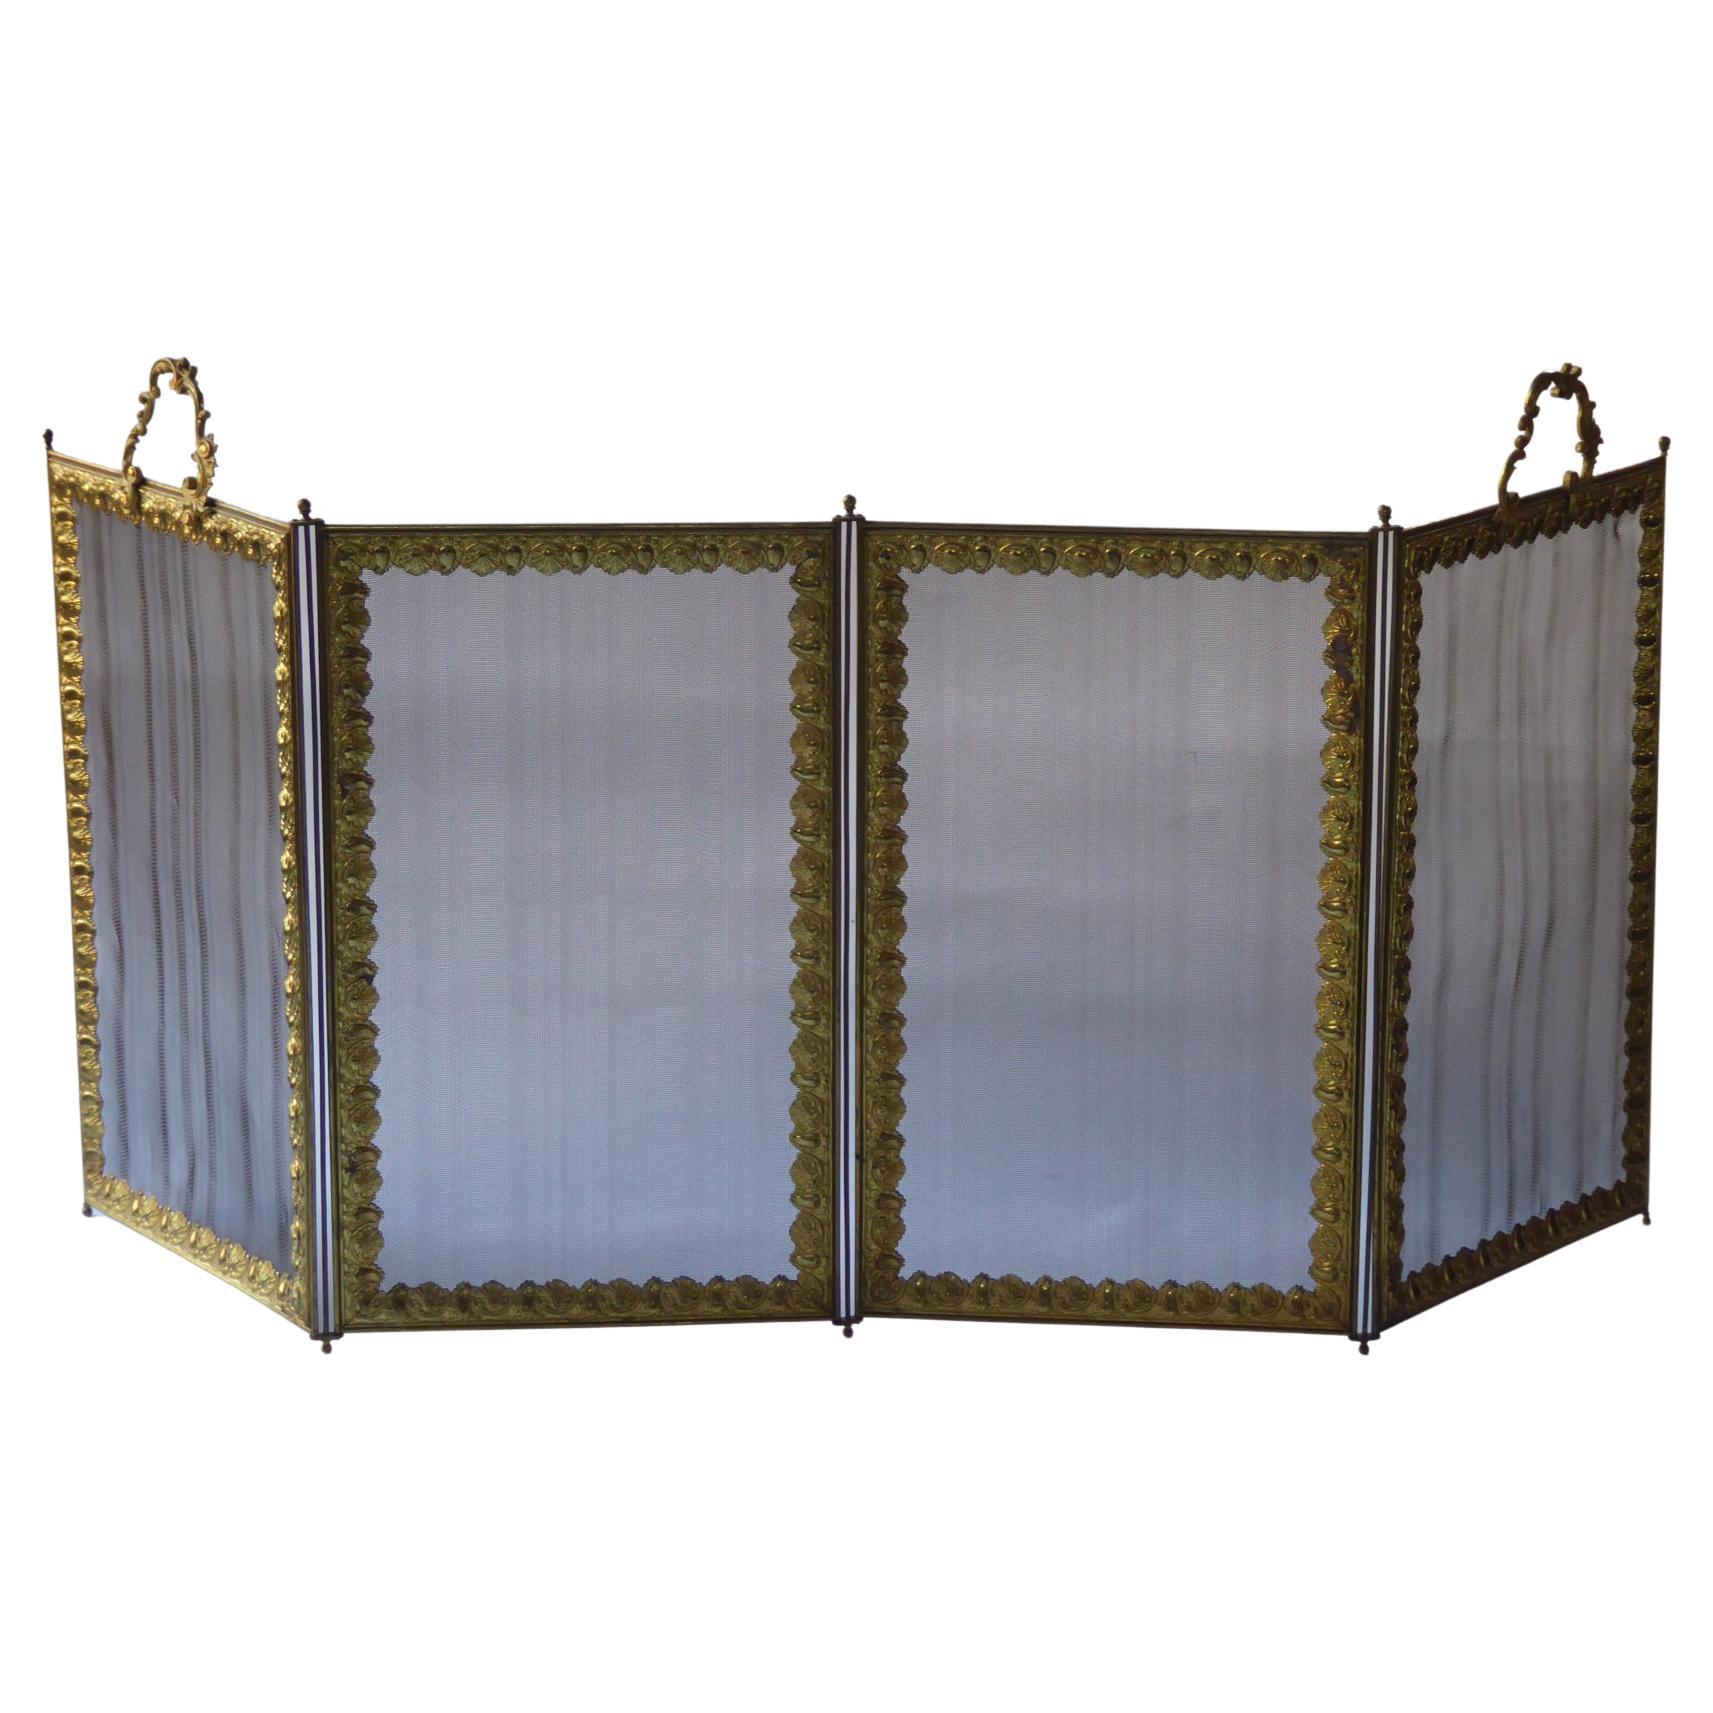 Antique French Napoleon III Fireplace Screen or Fire Screen, 19th Century